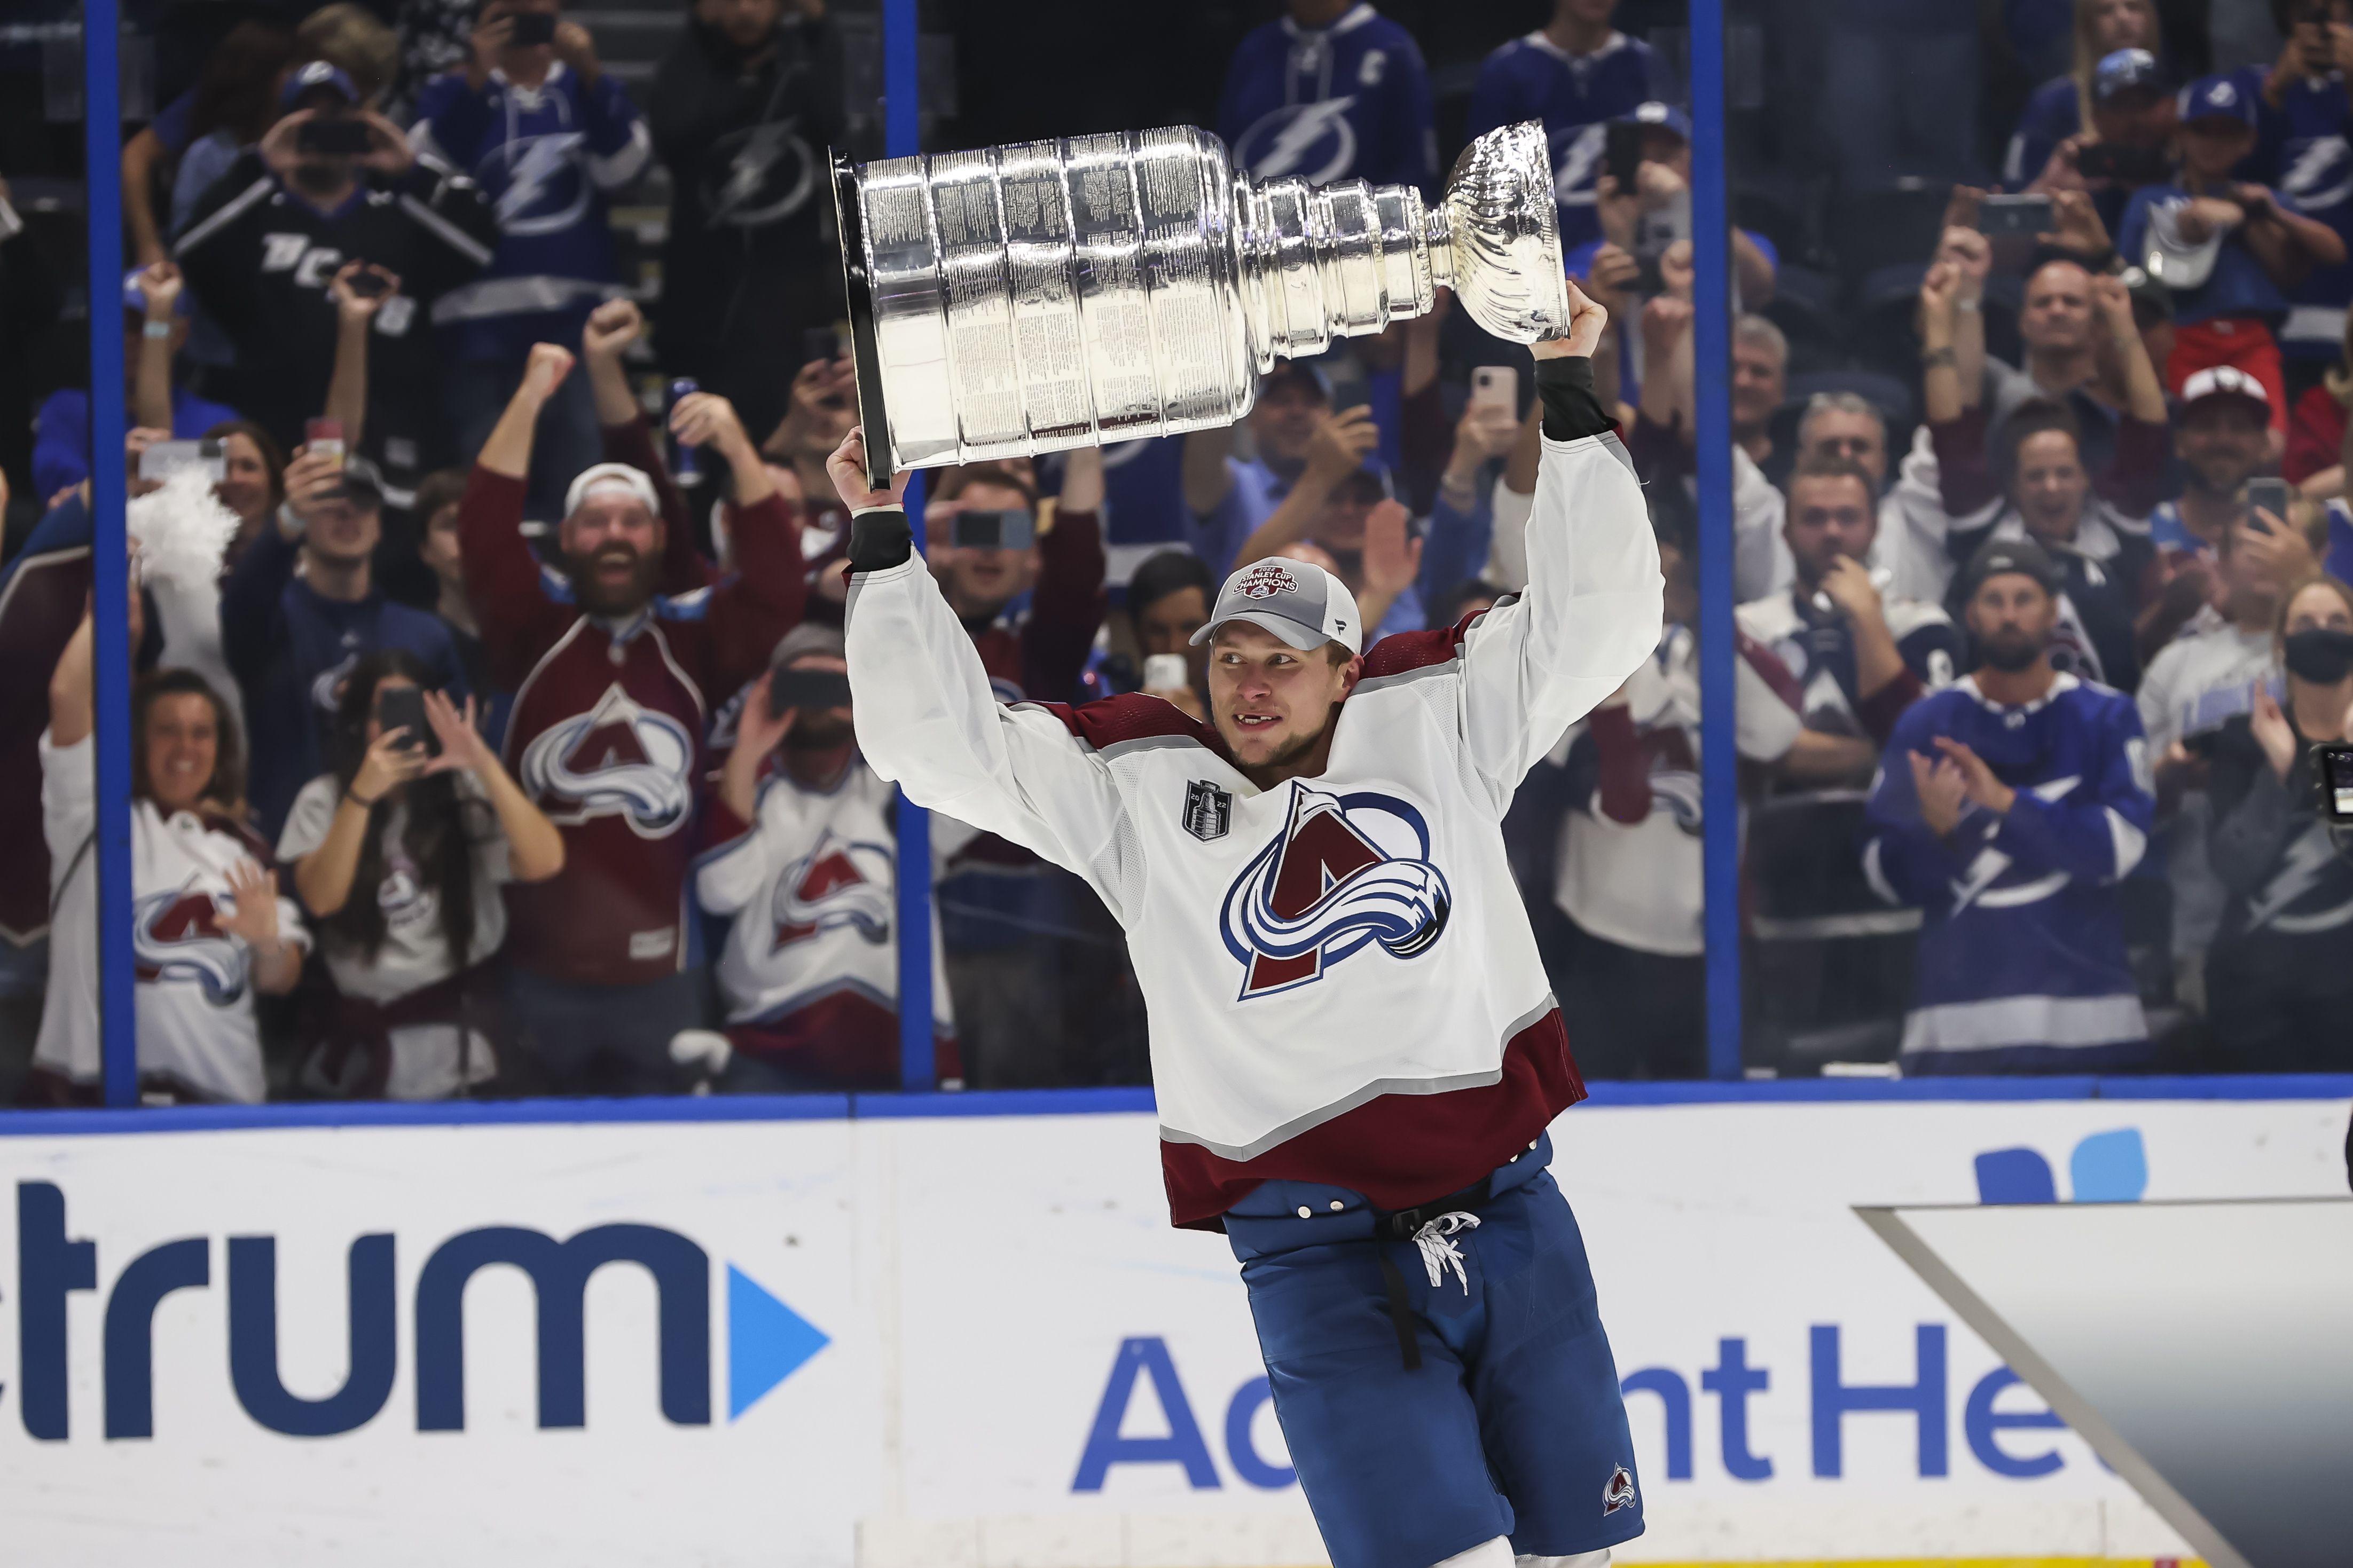 Erik Johnson #6 and the Colorado Avalanche celebrate winning the Stanley Cup.